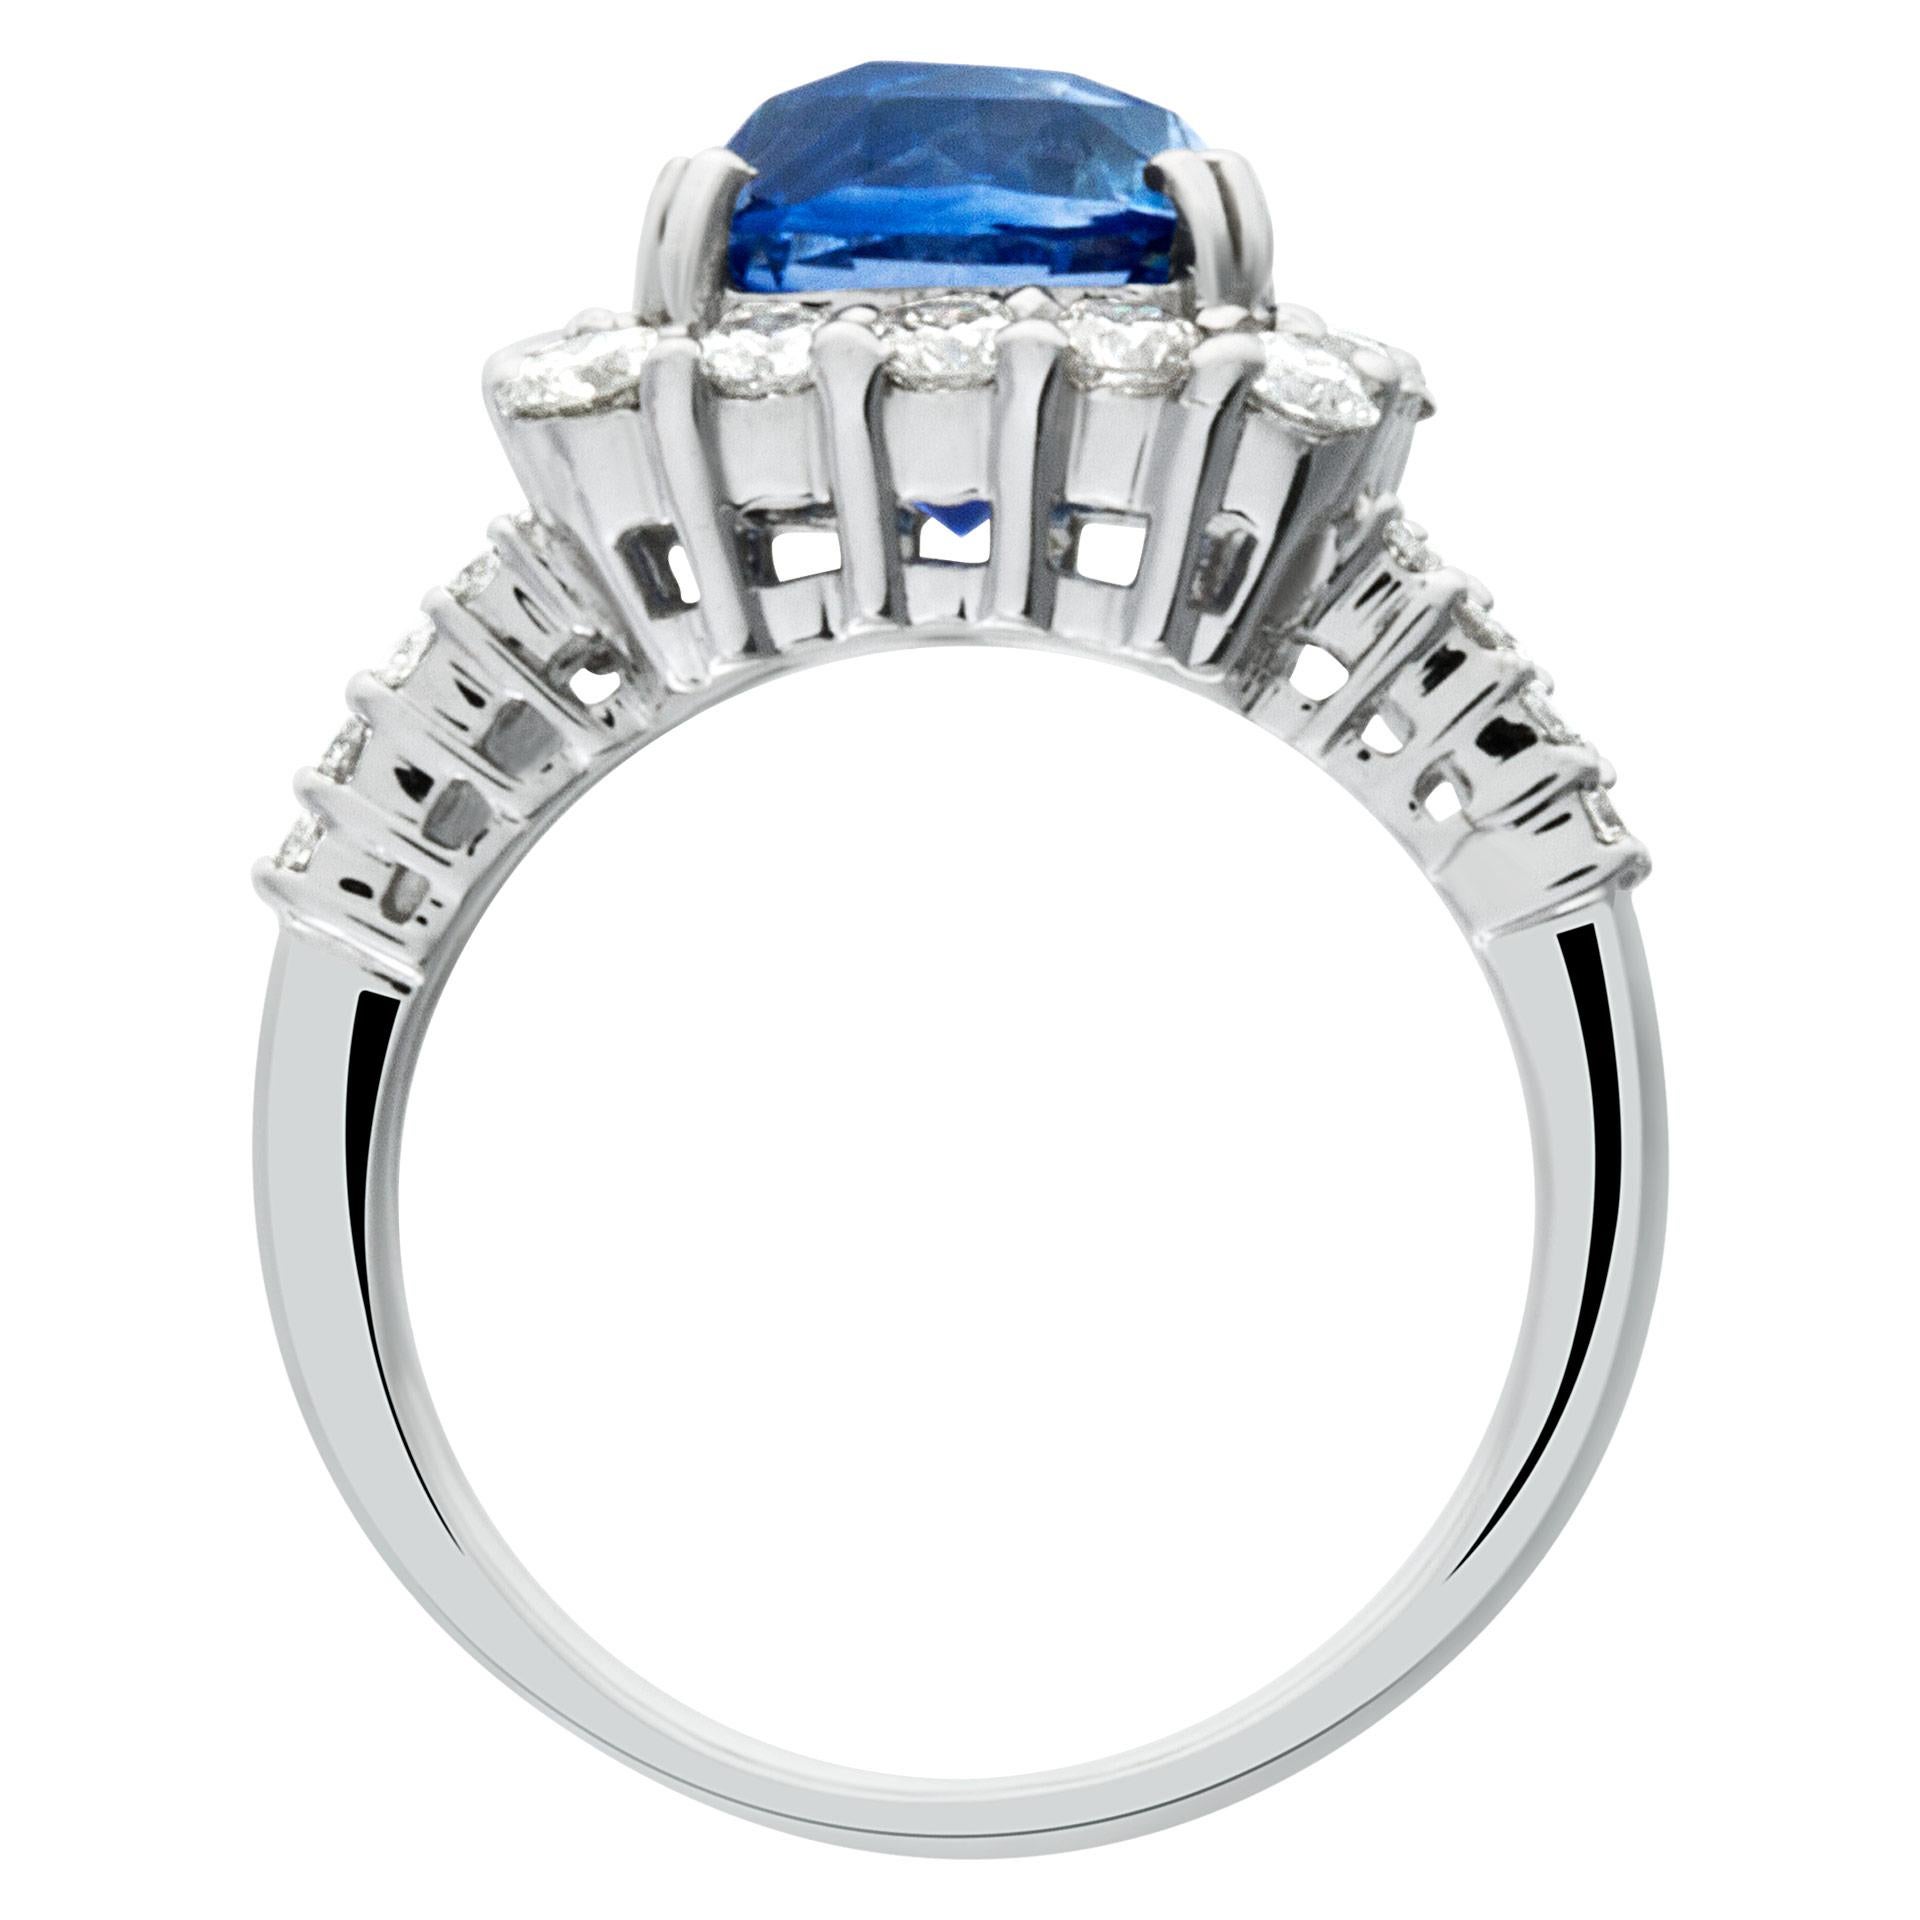 Women's Sparkling 5.73 carat blue sapphire ring with diamond accents in 18k white gold For Sale